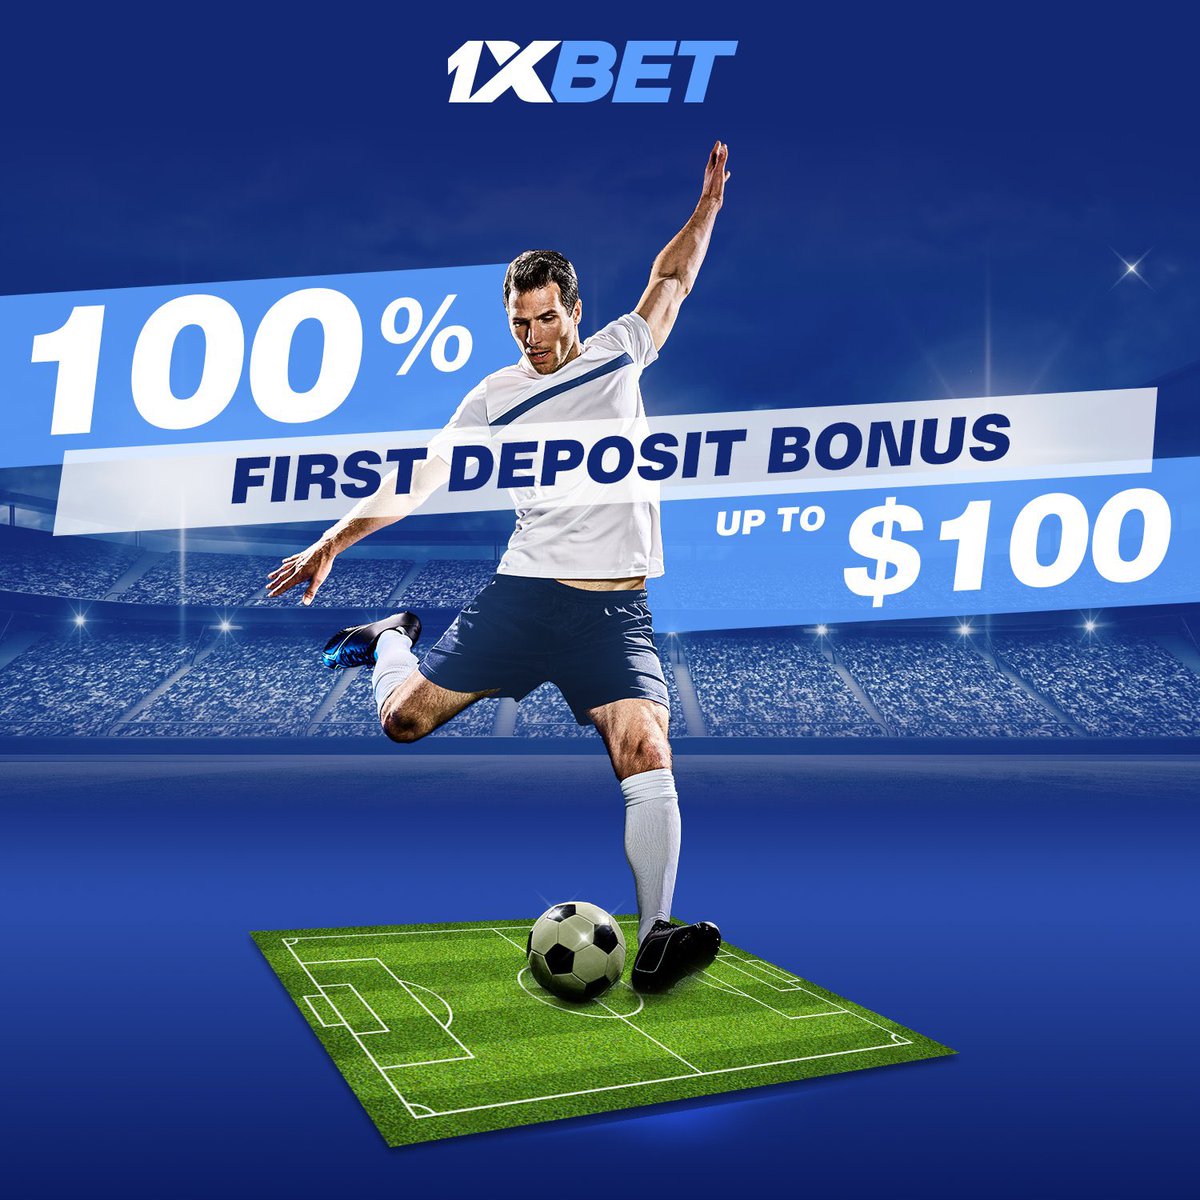 It's the season finale today! Don't forget to register with 1xbet and receive a 200% bonus on your first deposit via bit.ly/3wzcCY8 Using the promo code “LUCID1x ”.